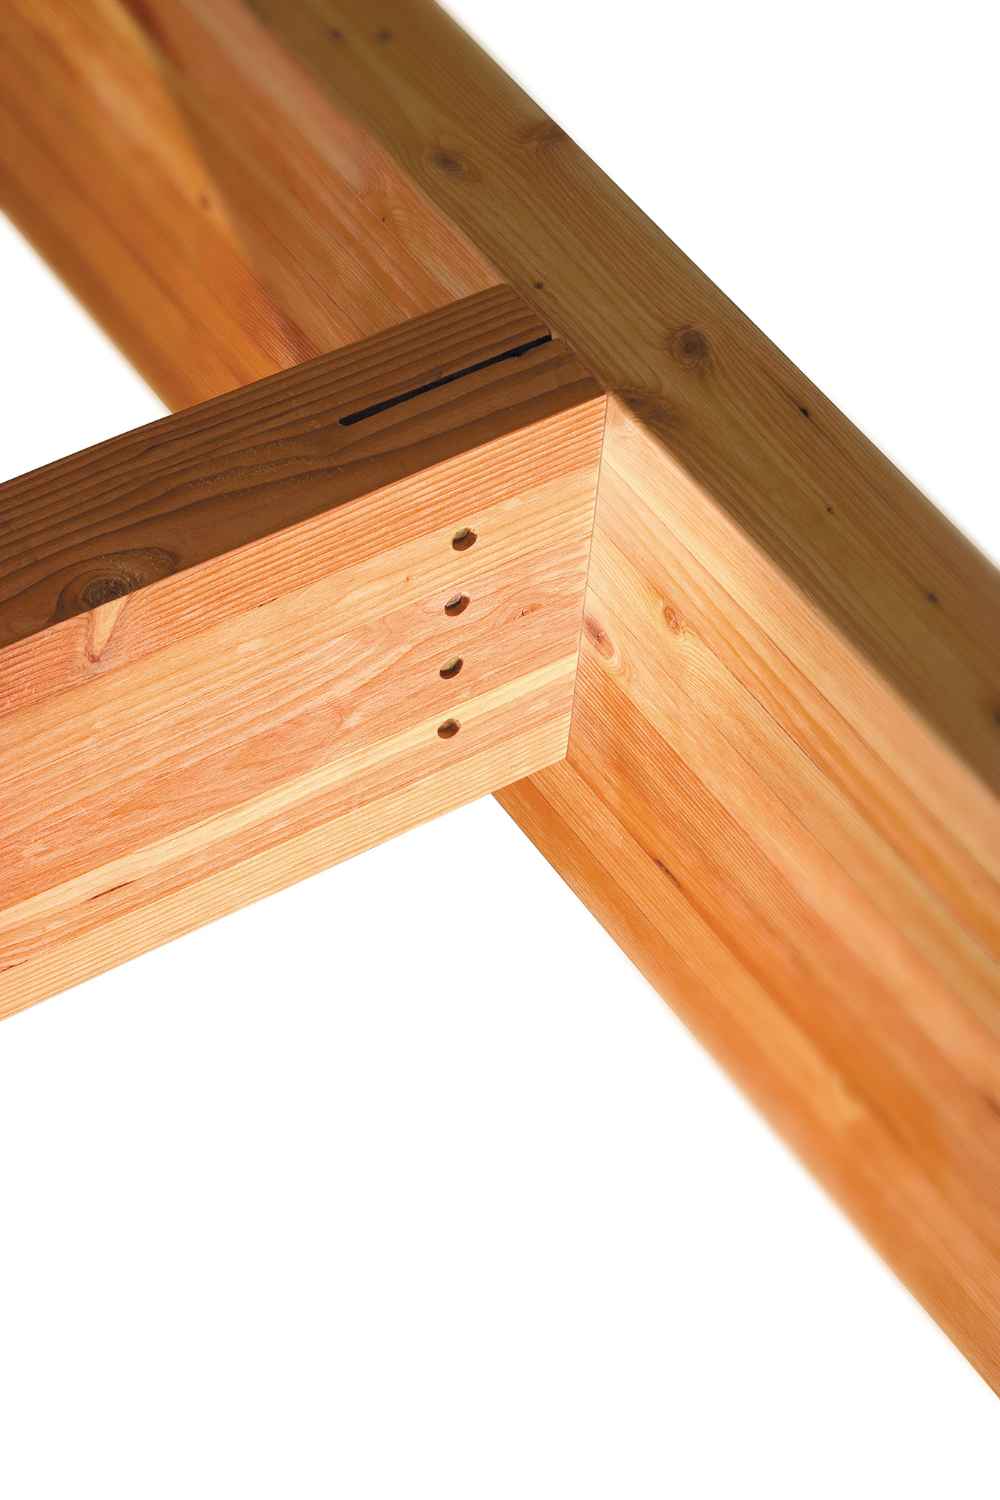 Simpson CJT6ZS Concealed Joist Tie w Short Pins ZMAX Finish image 4 of 5